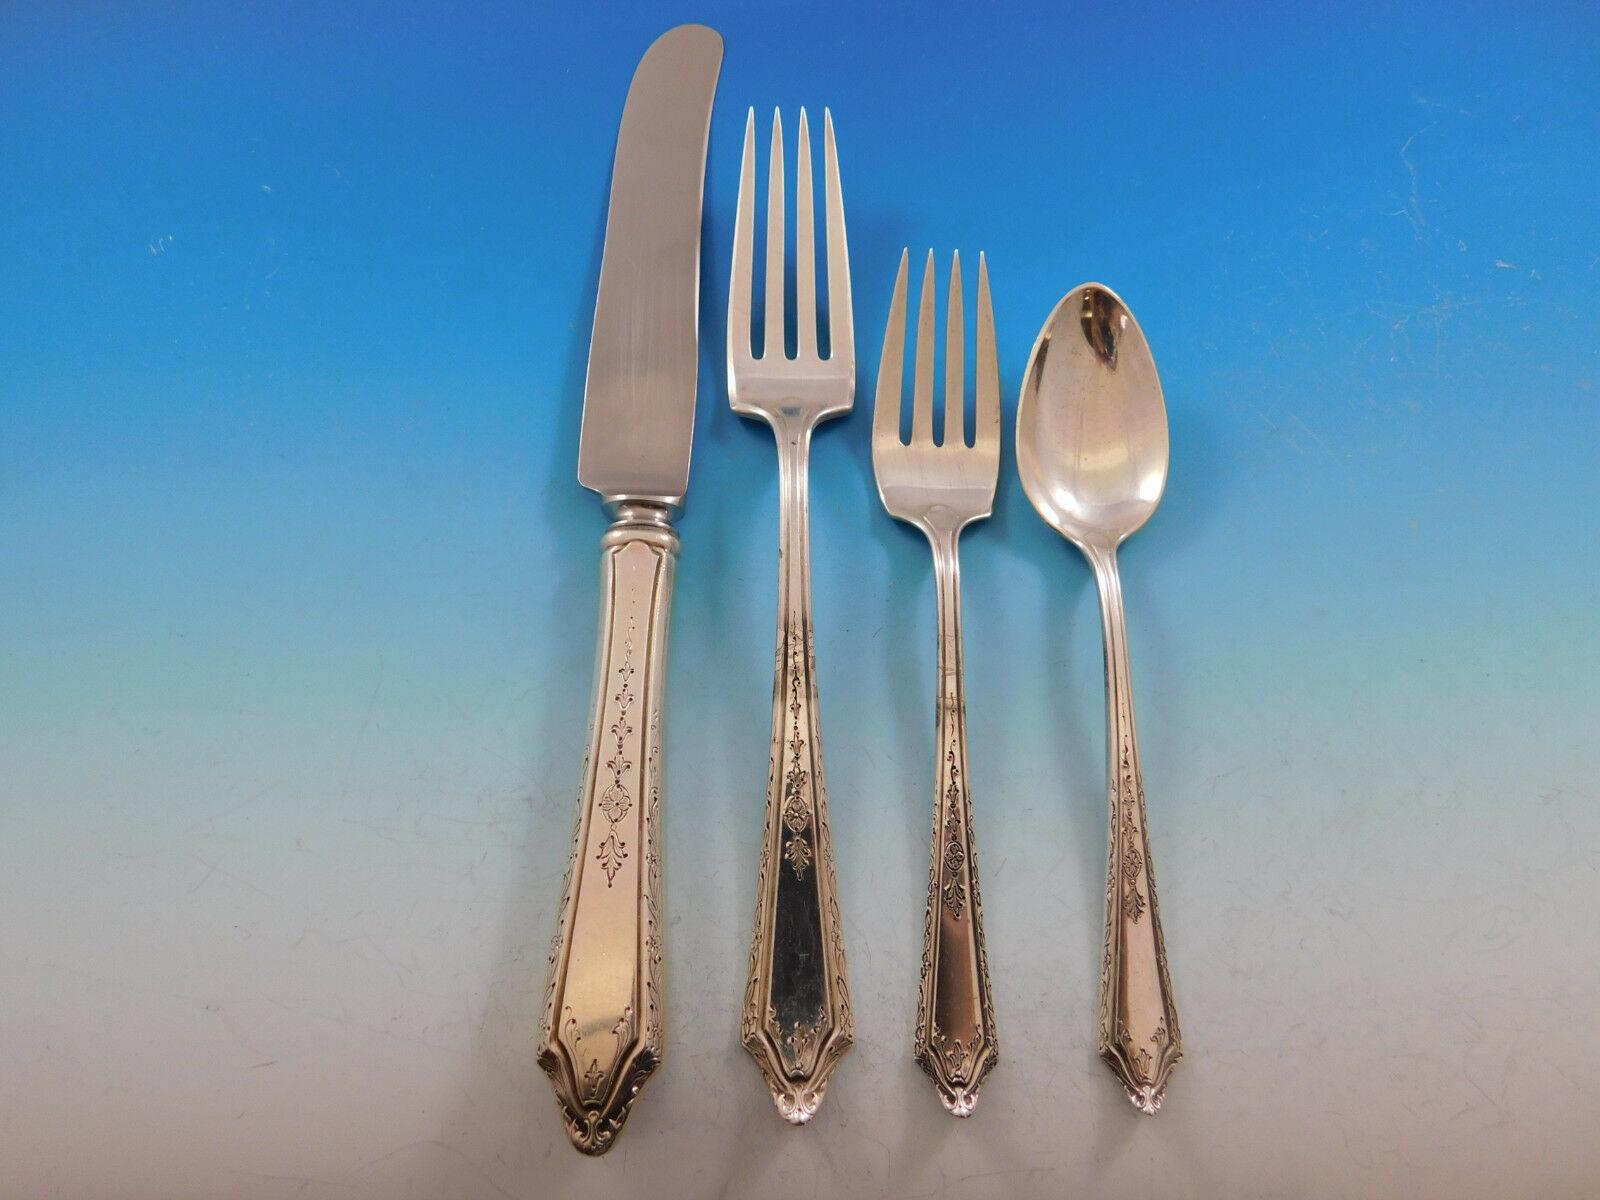 Monumental dinner size Virginia Lee by Towle sterling silver flatware set - 111 Pieces. This scarce set includes:

8 dinner size knives, 9 3/4